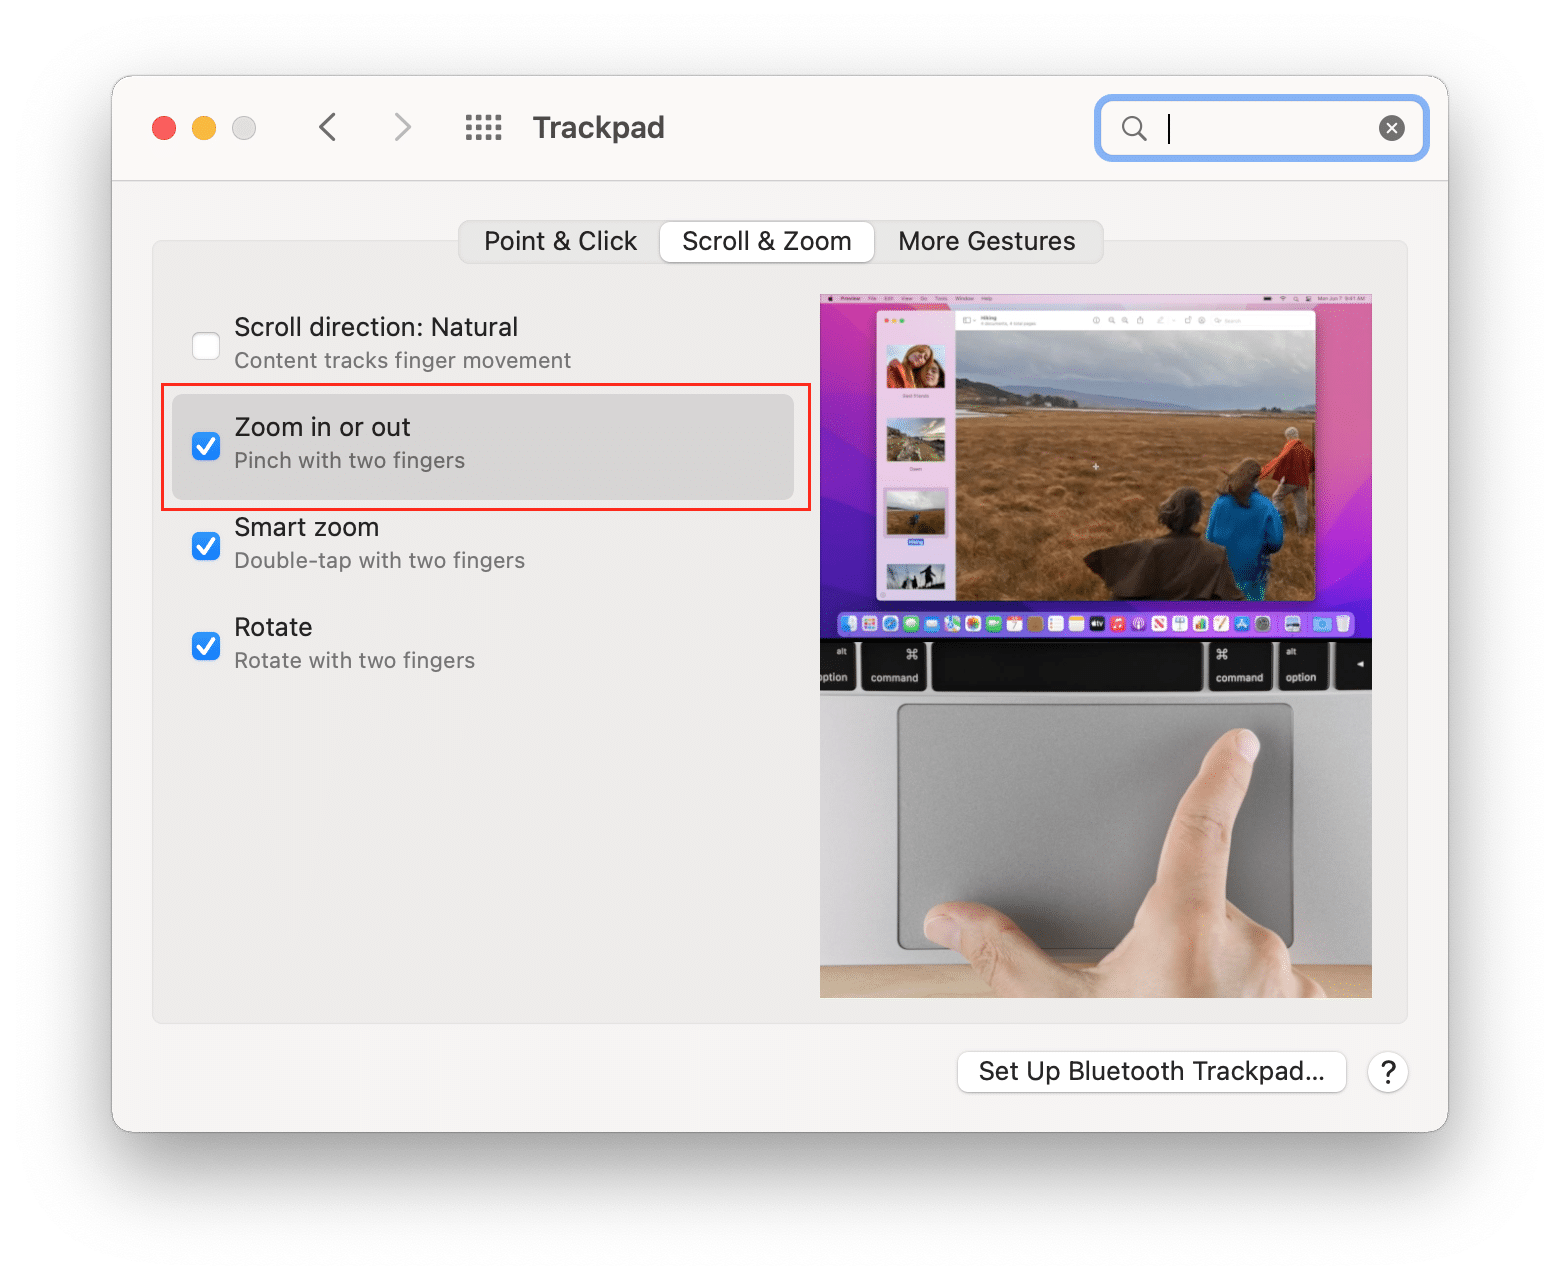 Trackpad preferences showing where to enable the Zoom option